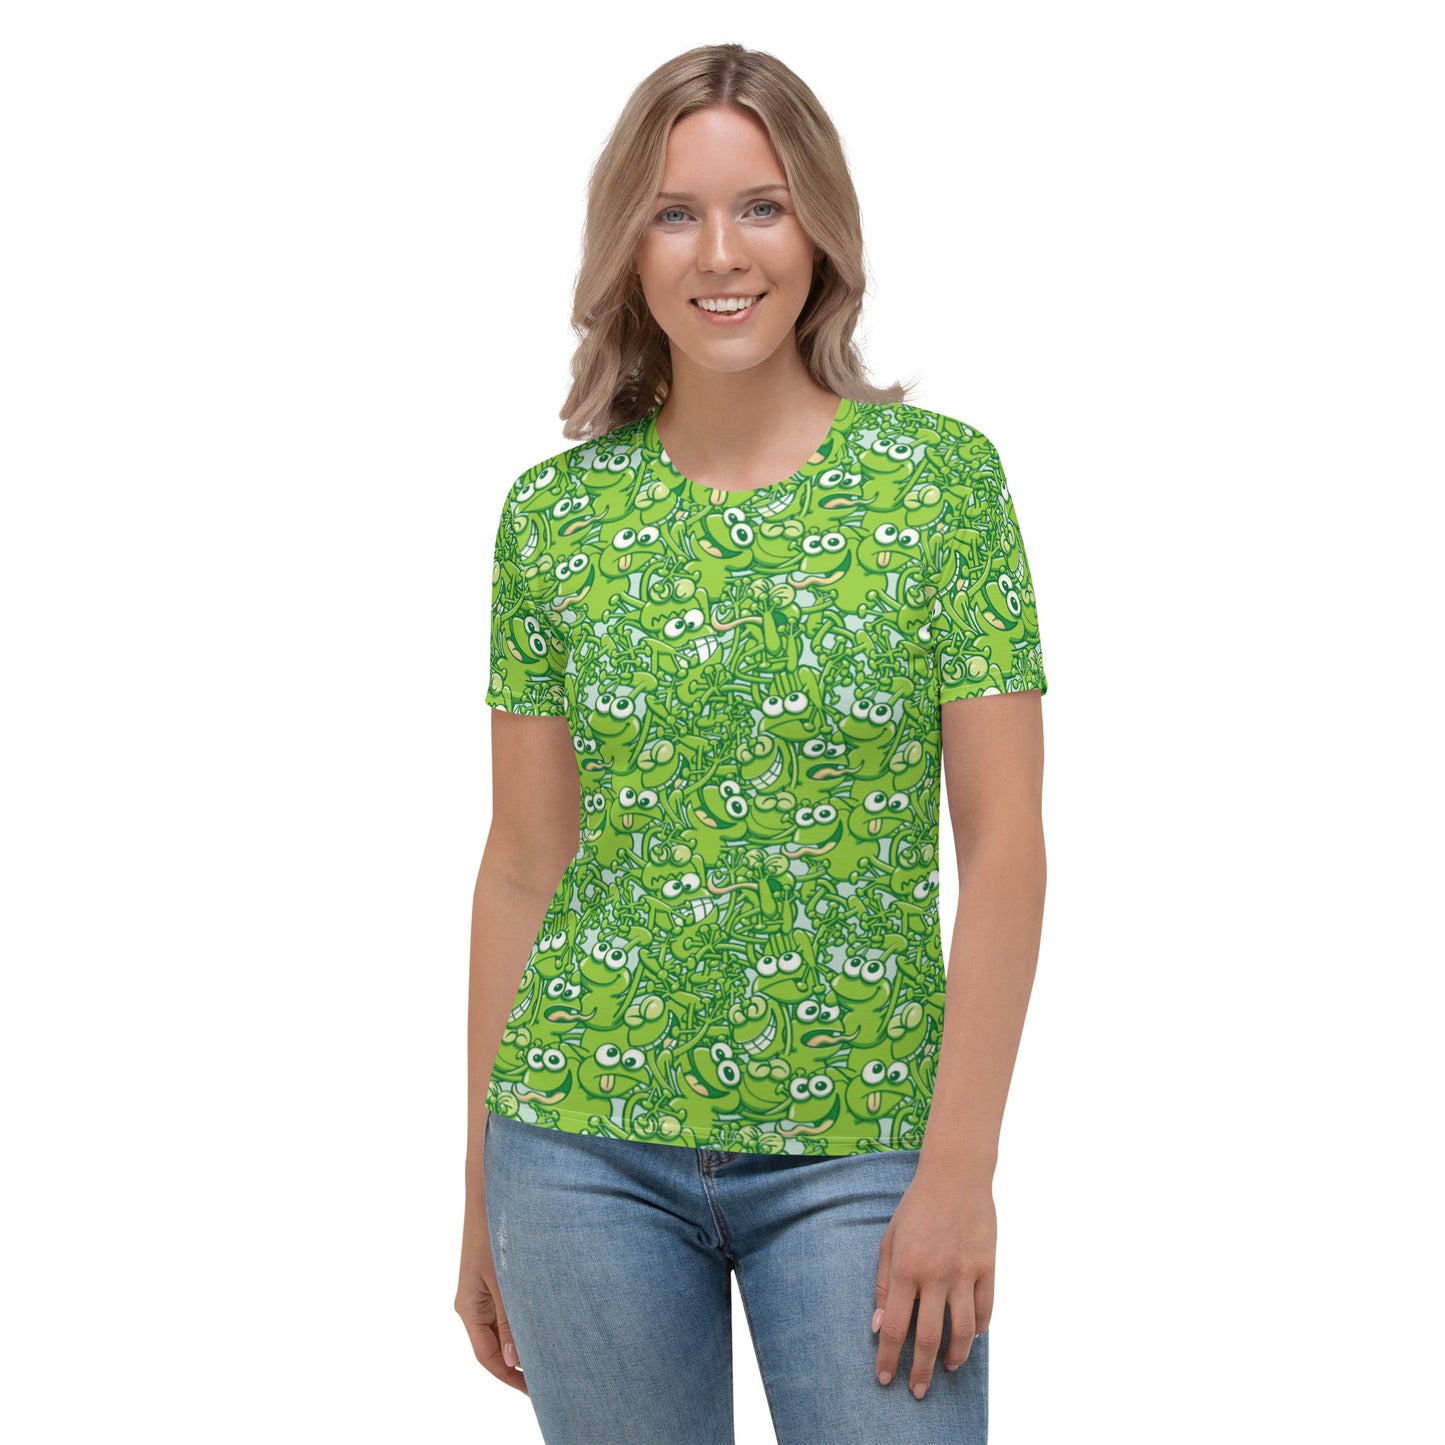 A tangled army of happy green frogs appears when the rain stops Women's T-shirt. Front view